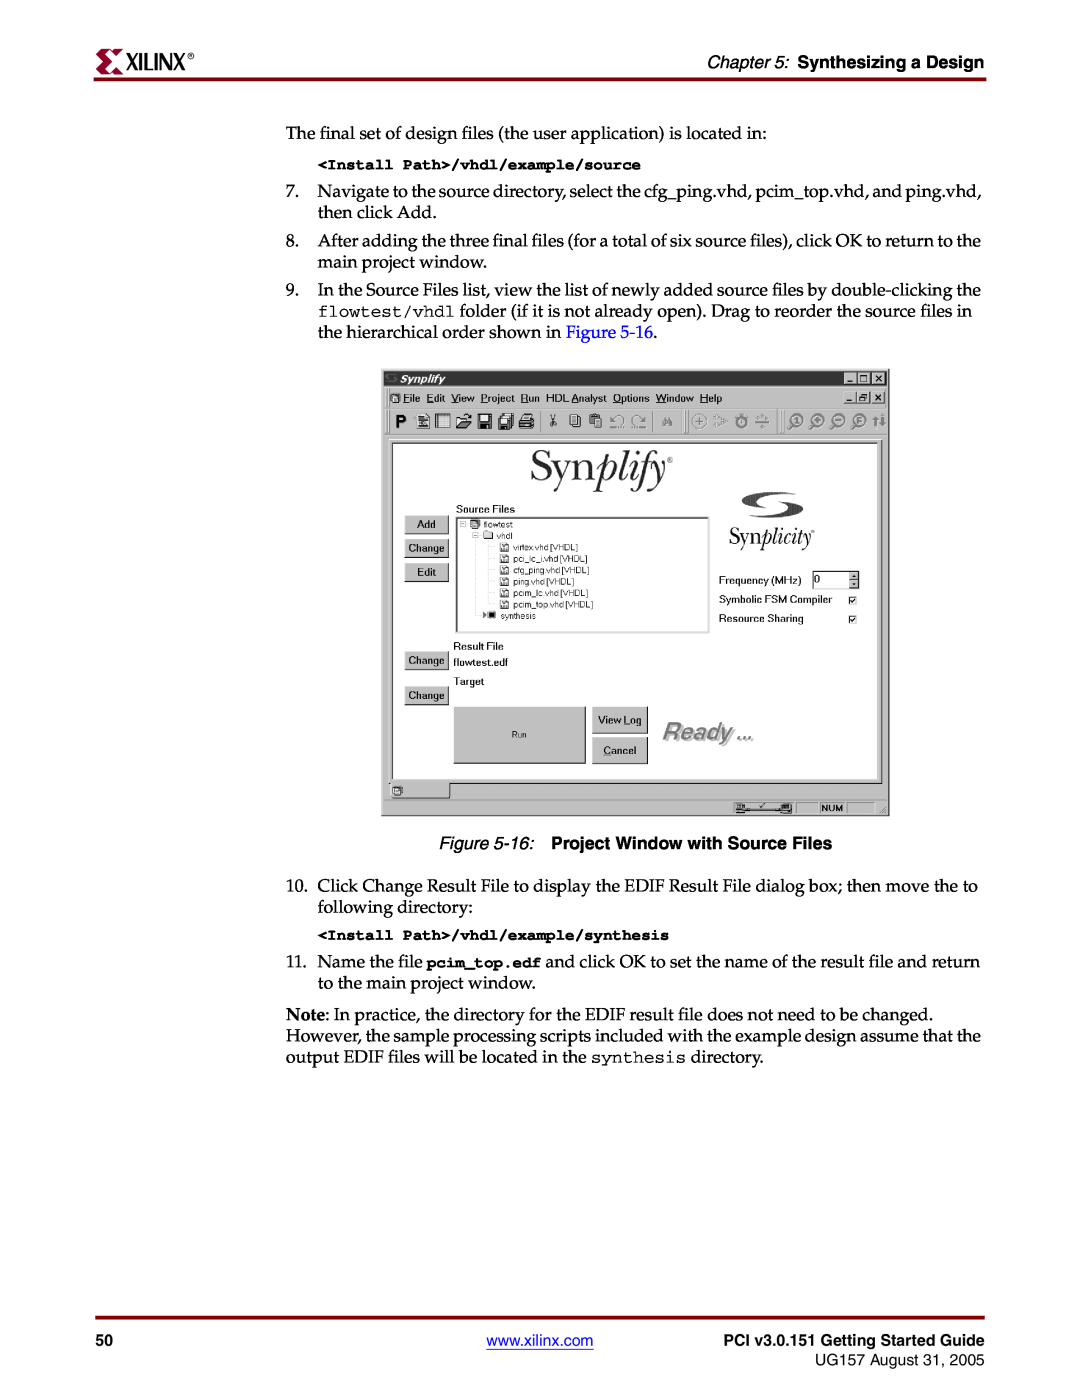 Xilinx PCI v3.0 manual 16 Project Window with Source Files, Synthesizing a Design 